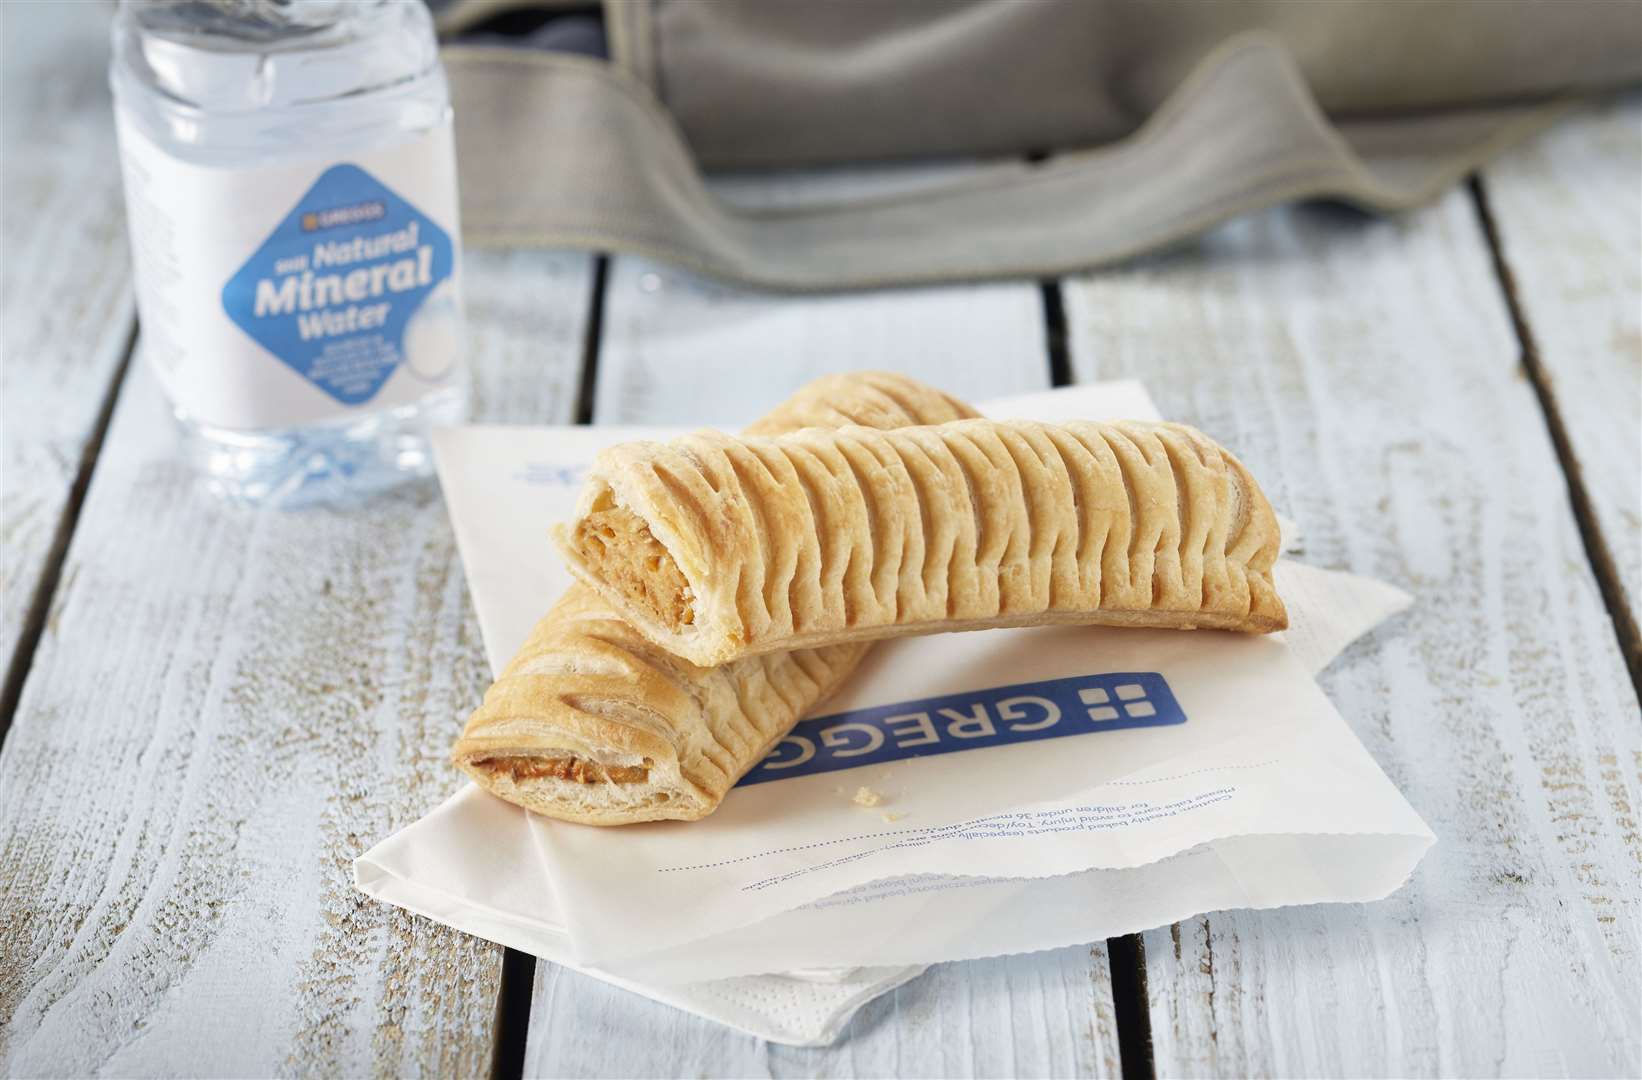 Greggs sells a ‘vegan friendly’ version of the sausage roll (Greggs/PA)